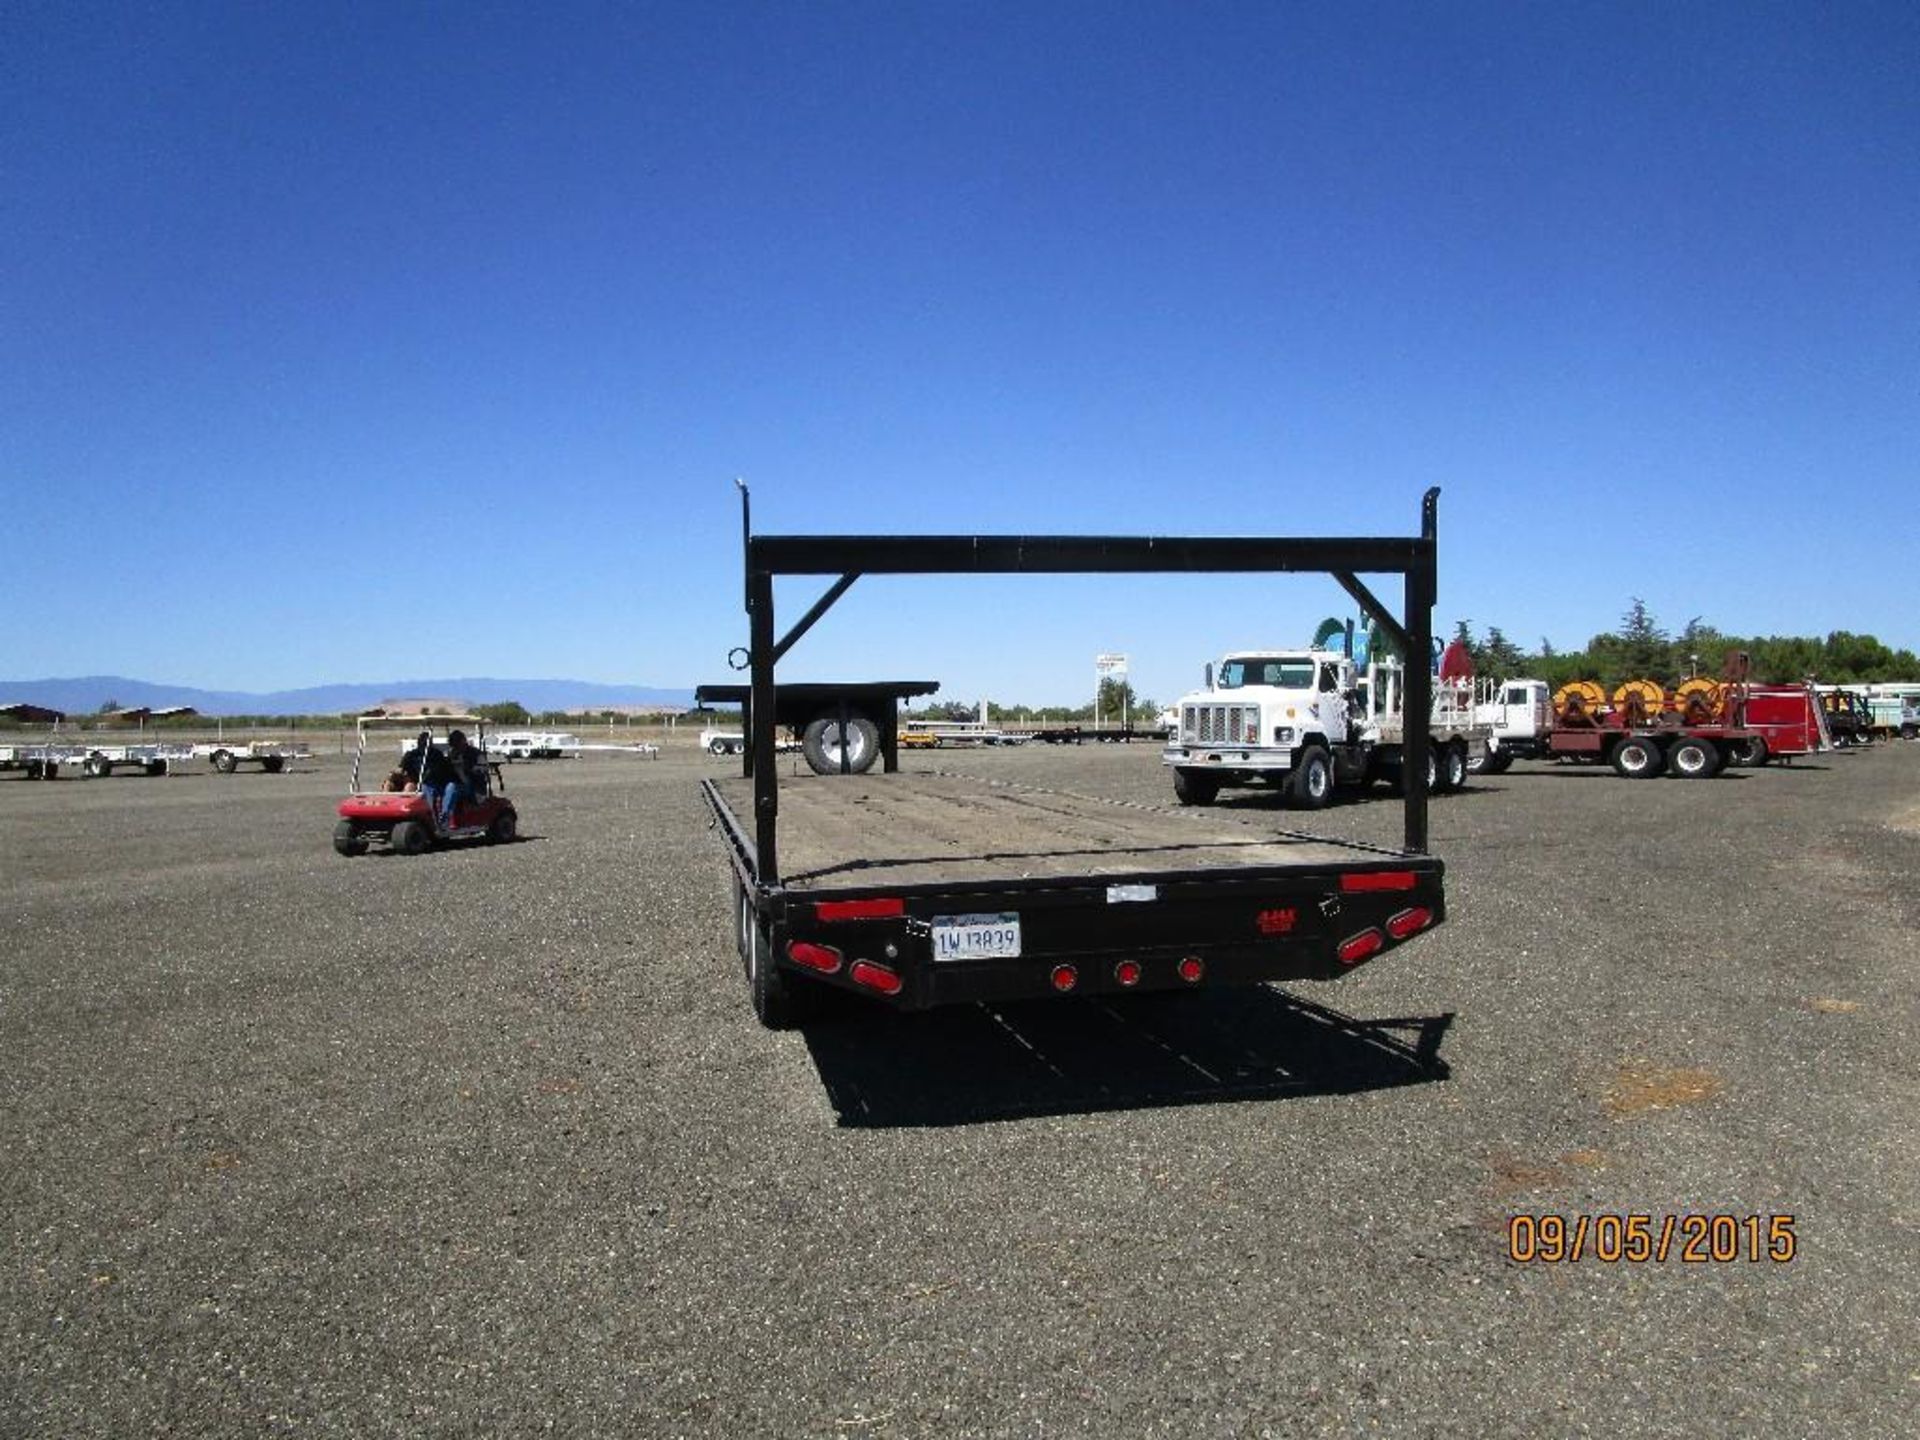 Wood Deck, Bottom 32', Top 8' GVWR 24,000 lbs. Equipped with: Stake Pockets Electric Brakes Tires - Image 3 of 8